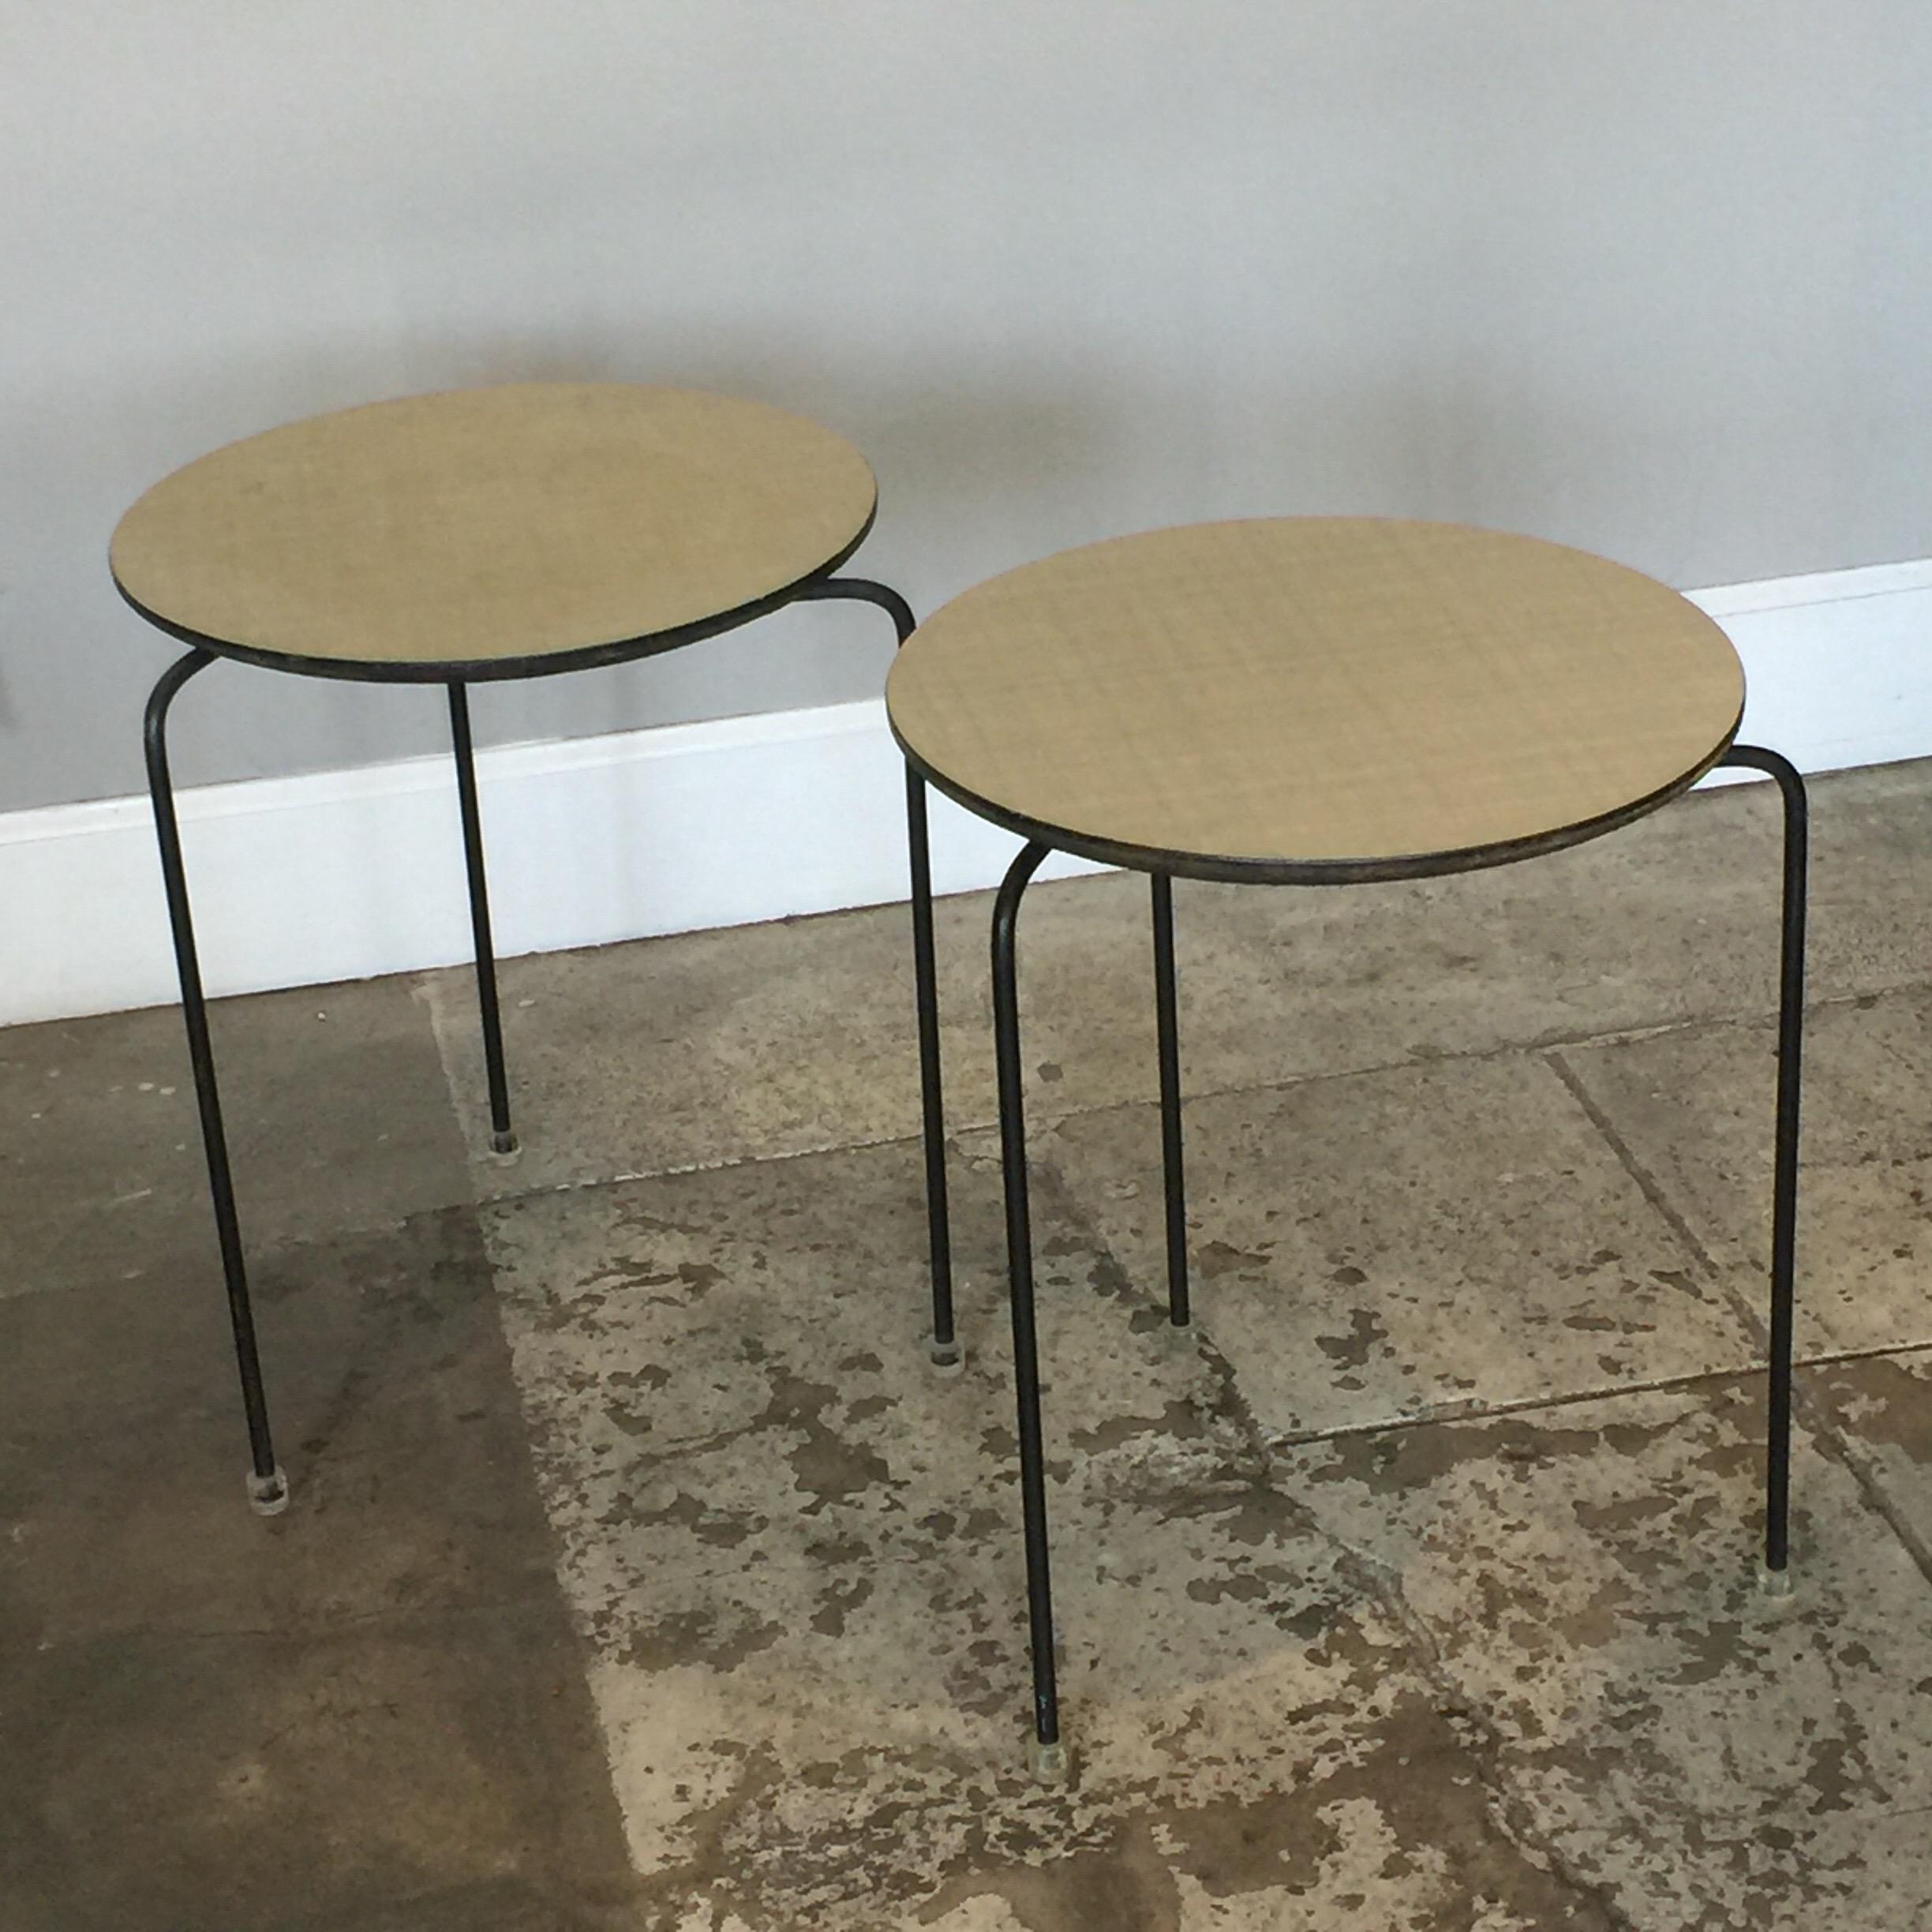 Pair of slender tripod laminate side tables with Lucite details. The top is 14.5 in. diameter.